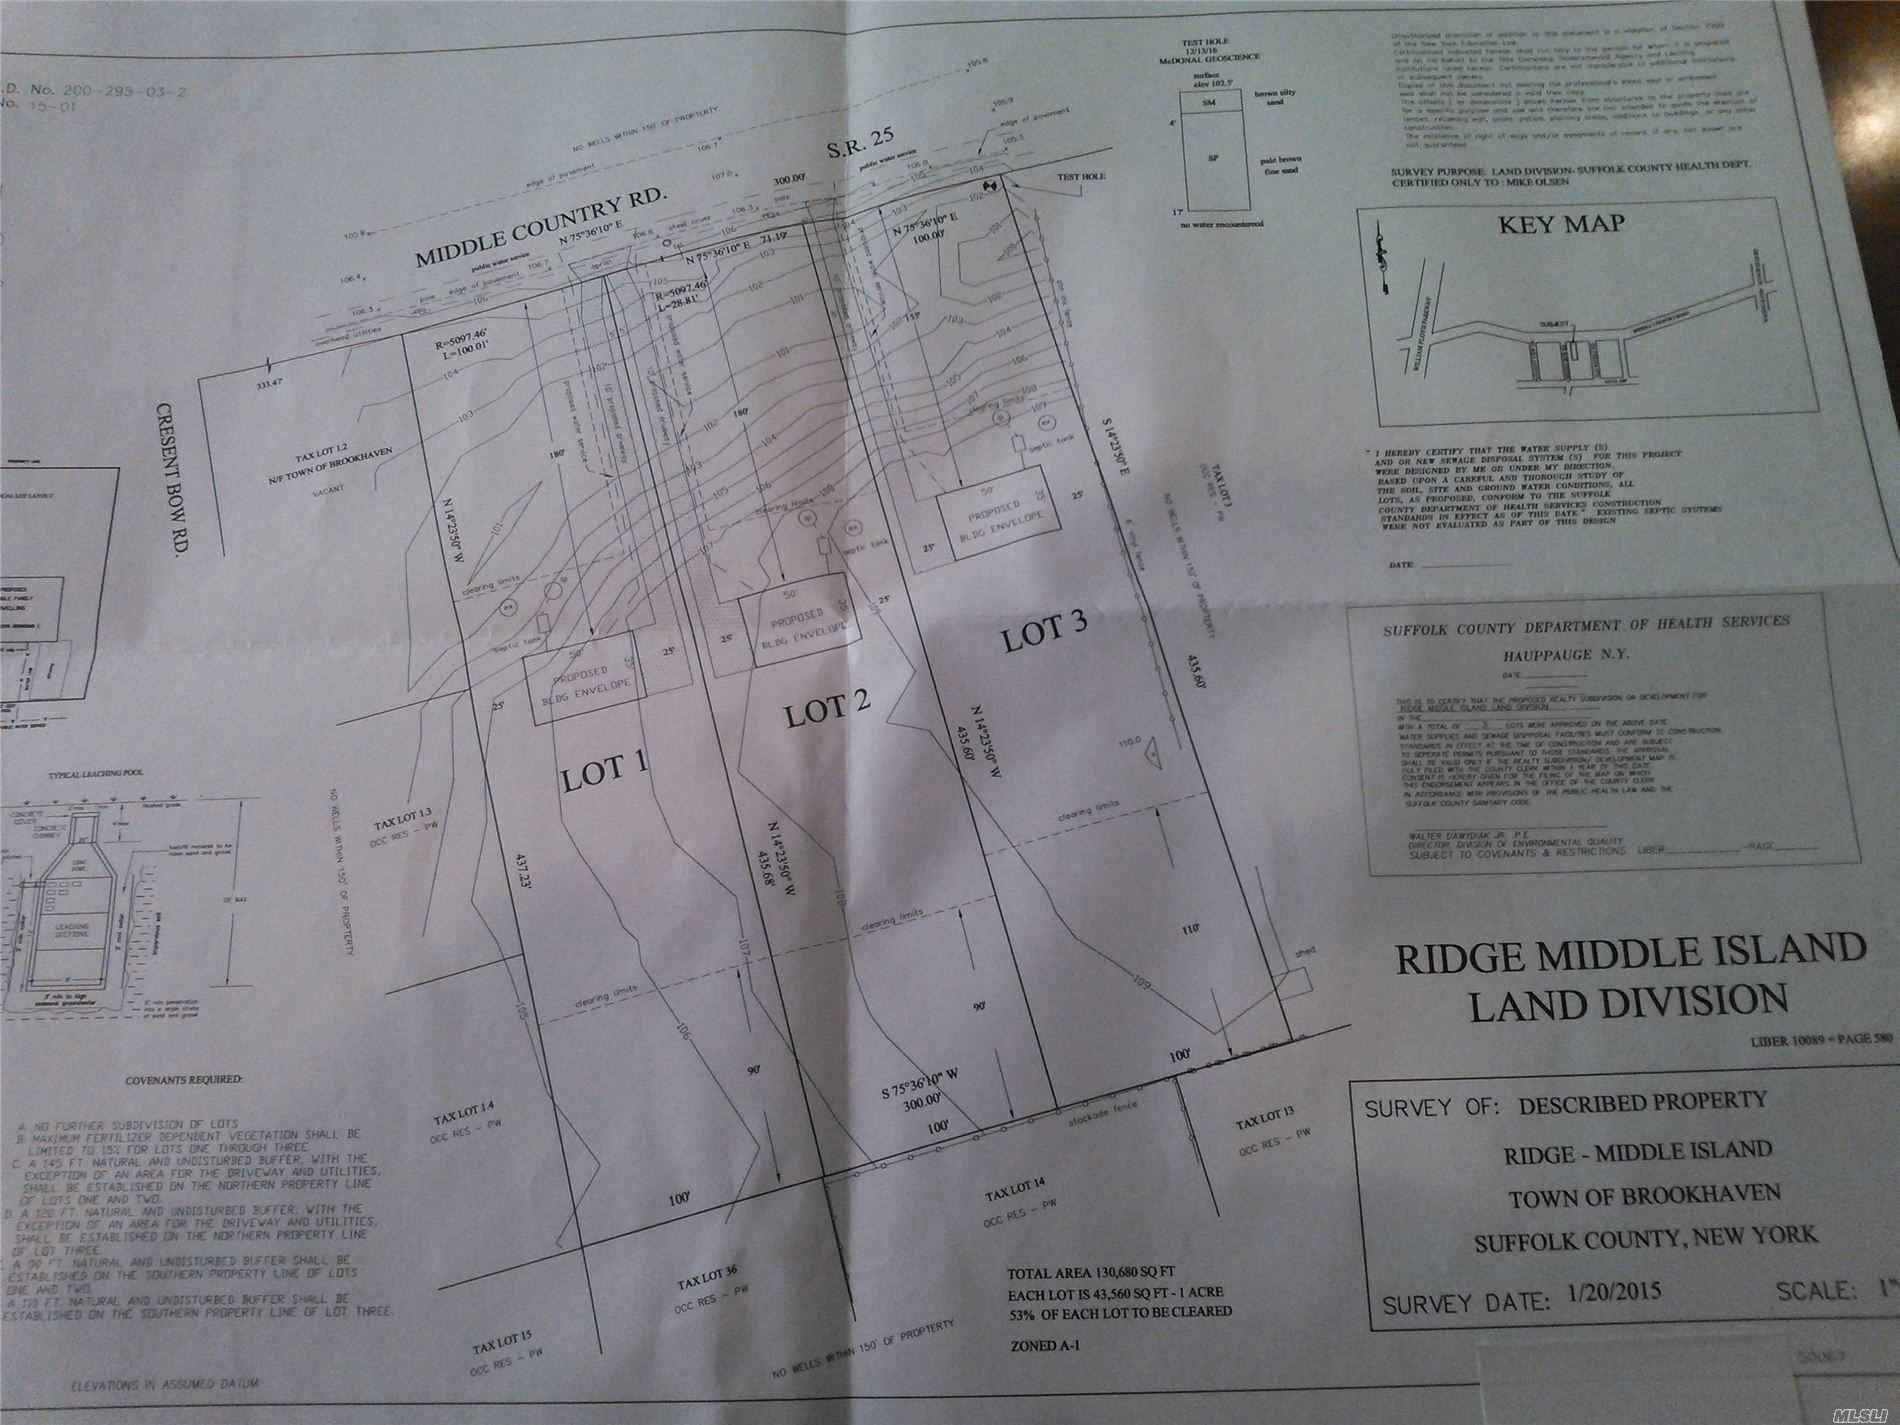 3 acre lot subdivided into 3 one acre lots.